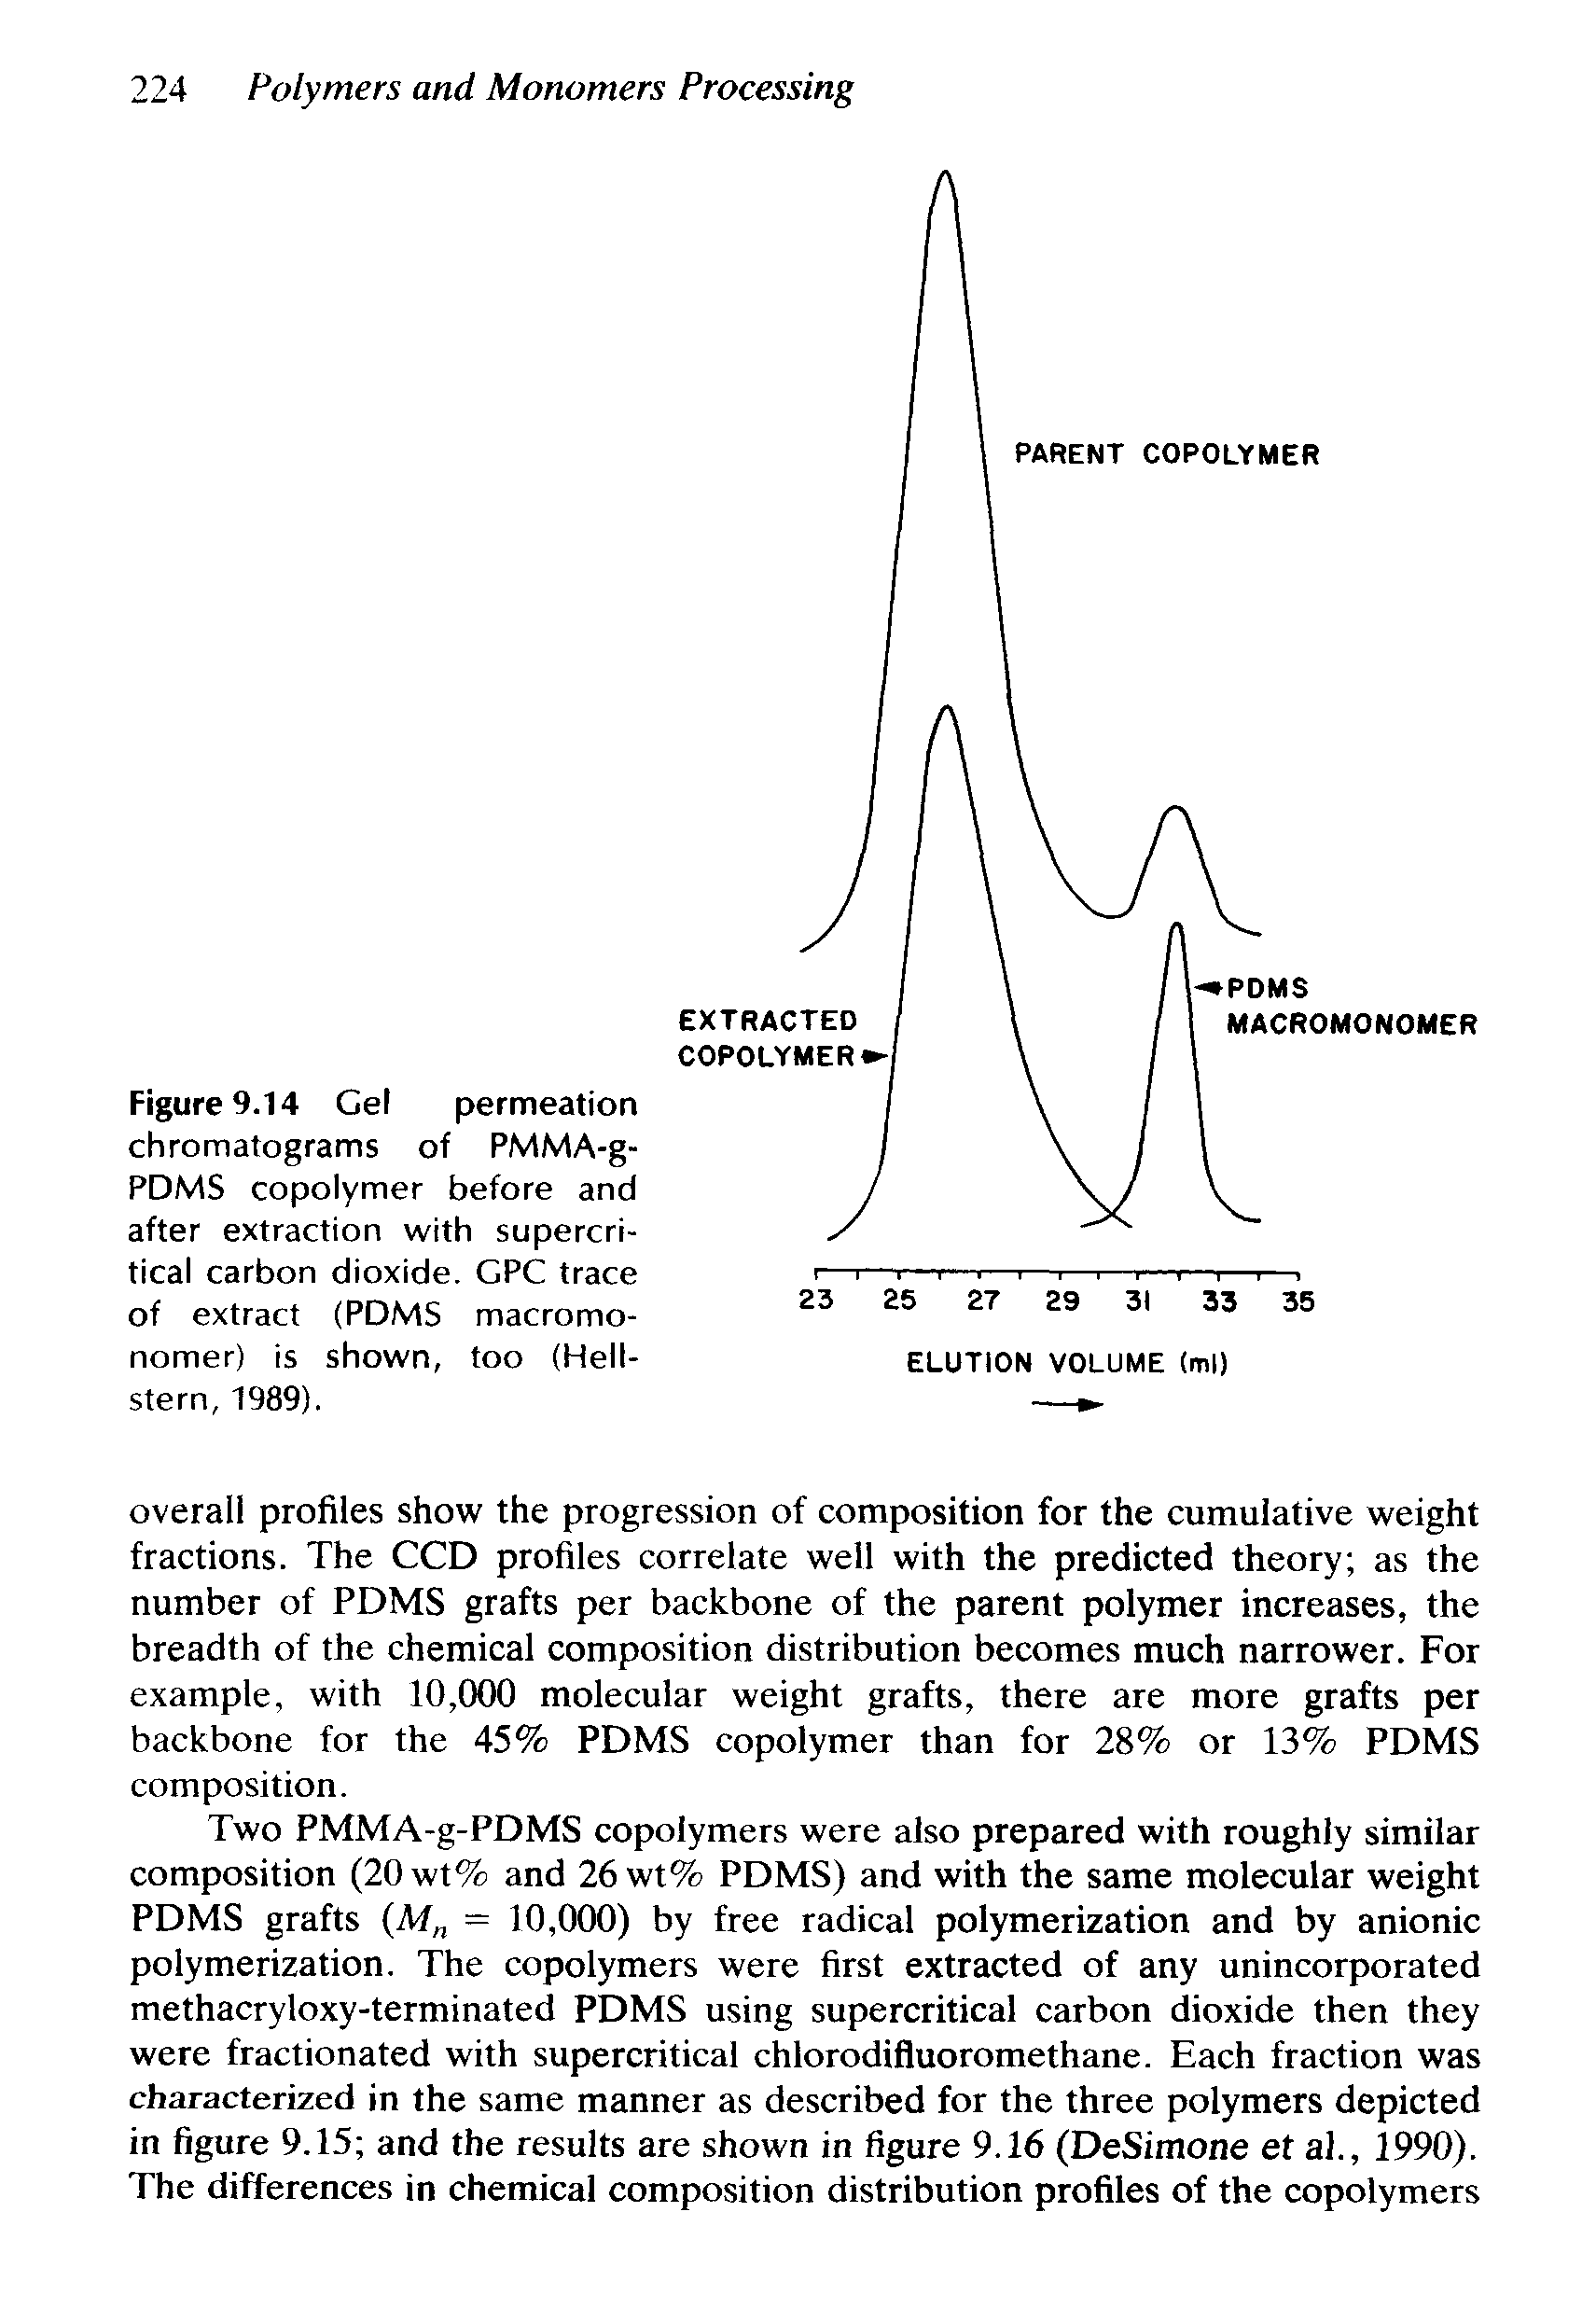 Figure 9.14 Gel permeation chromatograms of PMMA-g-PDMS copolymer before and after extraction with supercritical carbon dioxide. GPC trace of extract (PDMS macromonomer) is shown, too (Hell-stern, 1989).